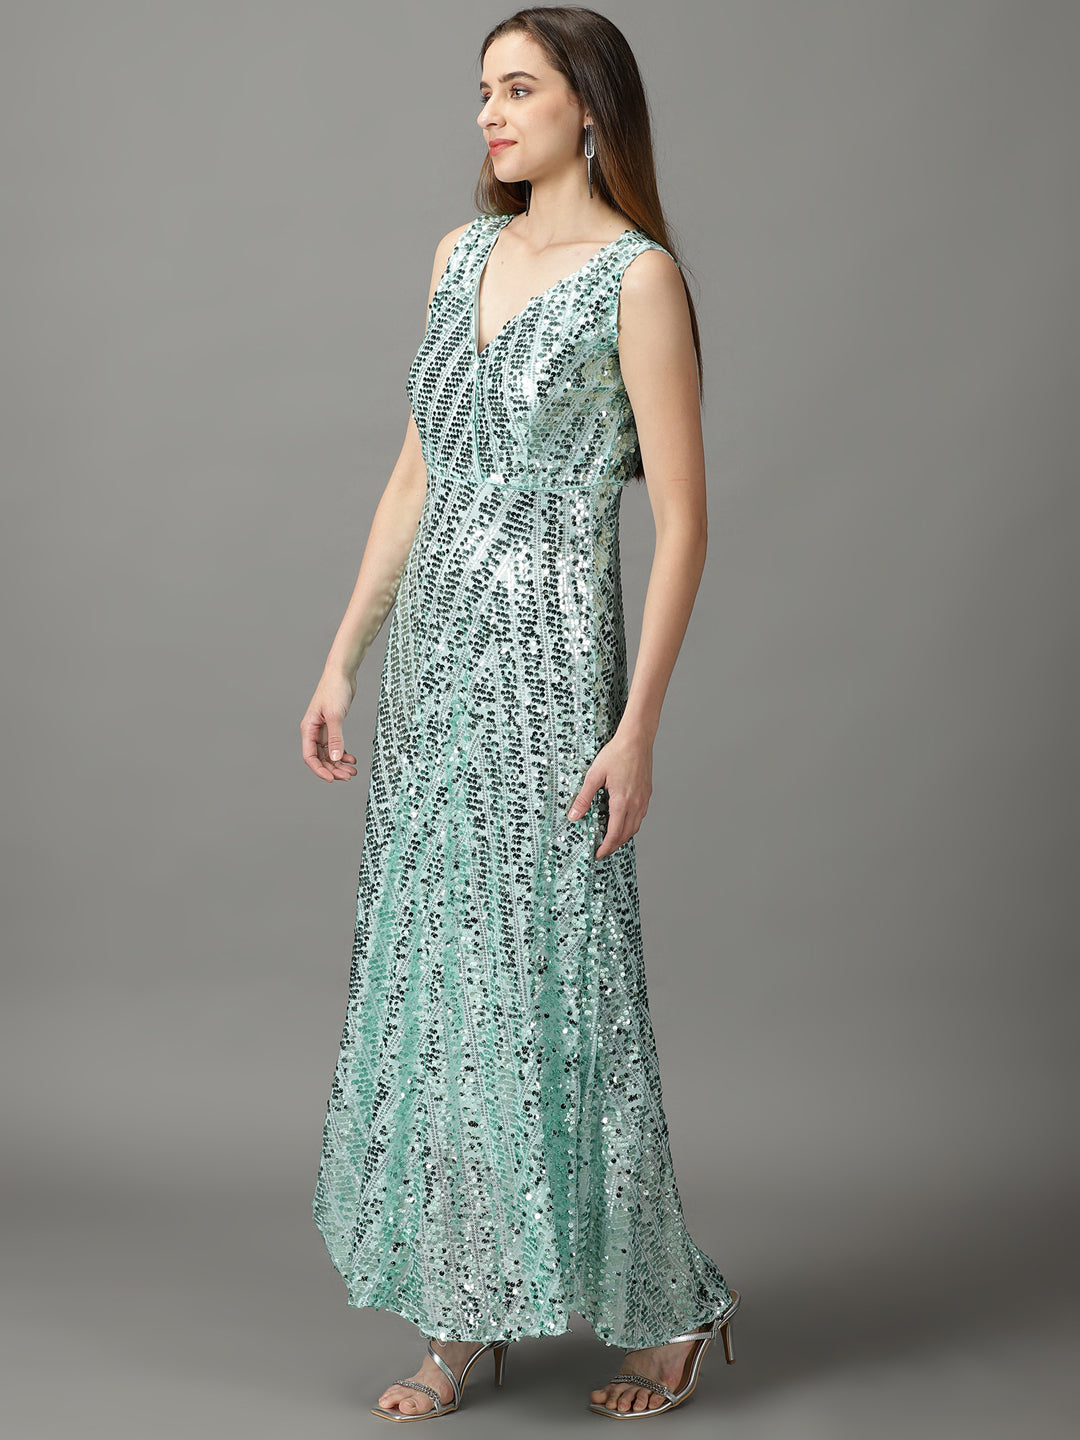 Women's Sea Green Embellished Fit and Flare Dress